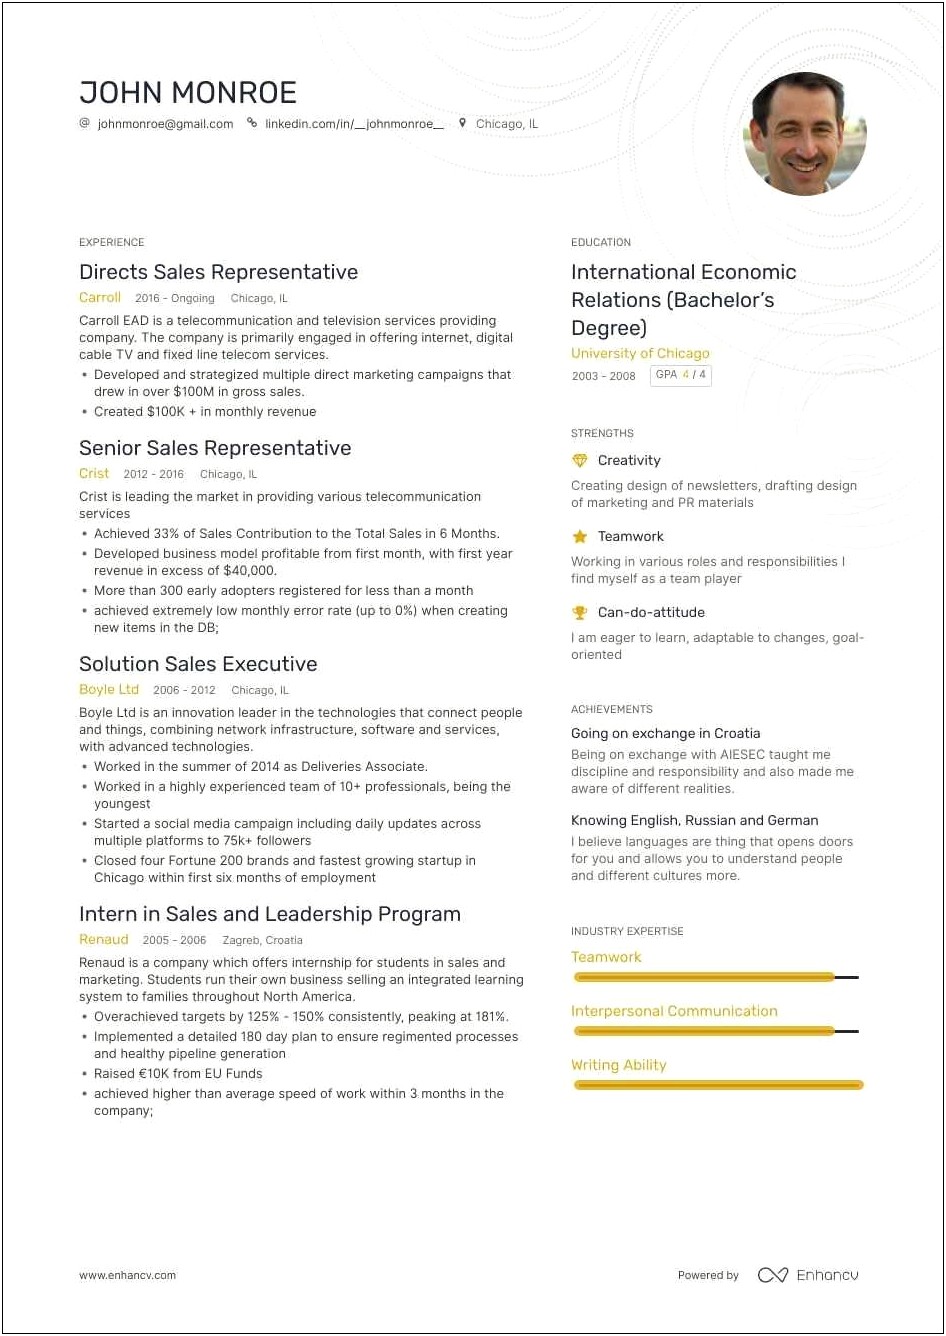 About Me On Resume Examples